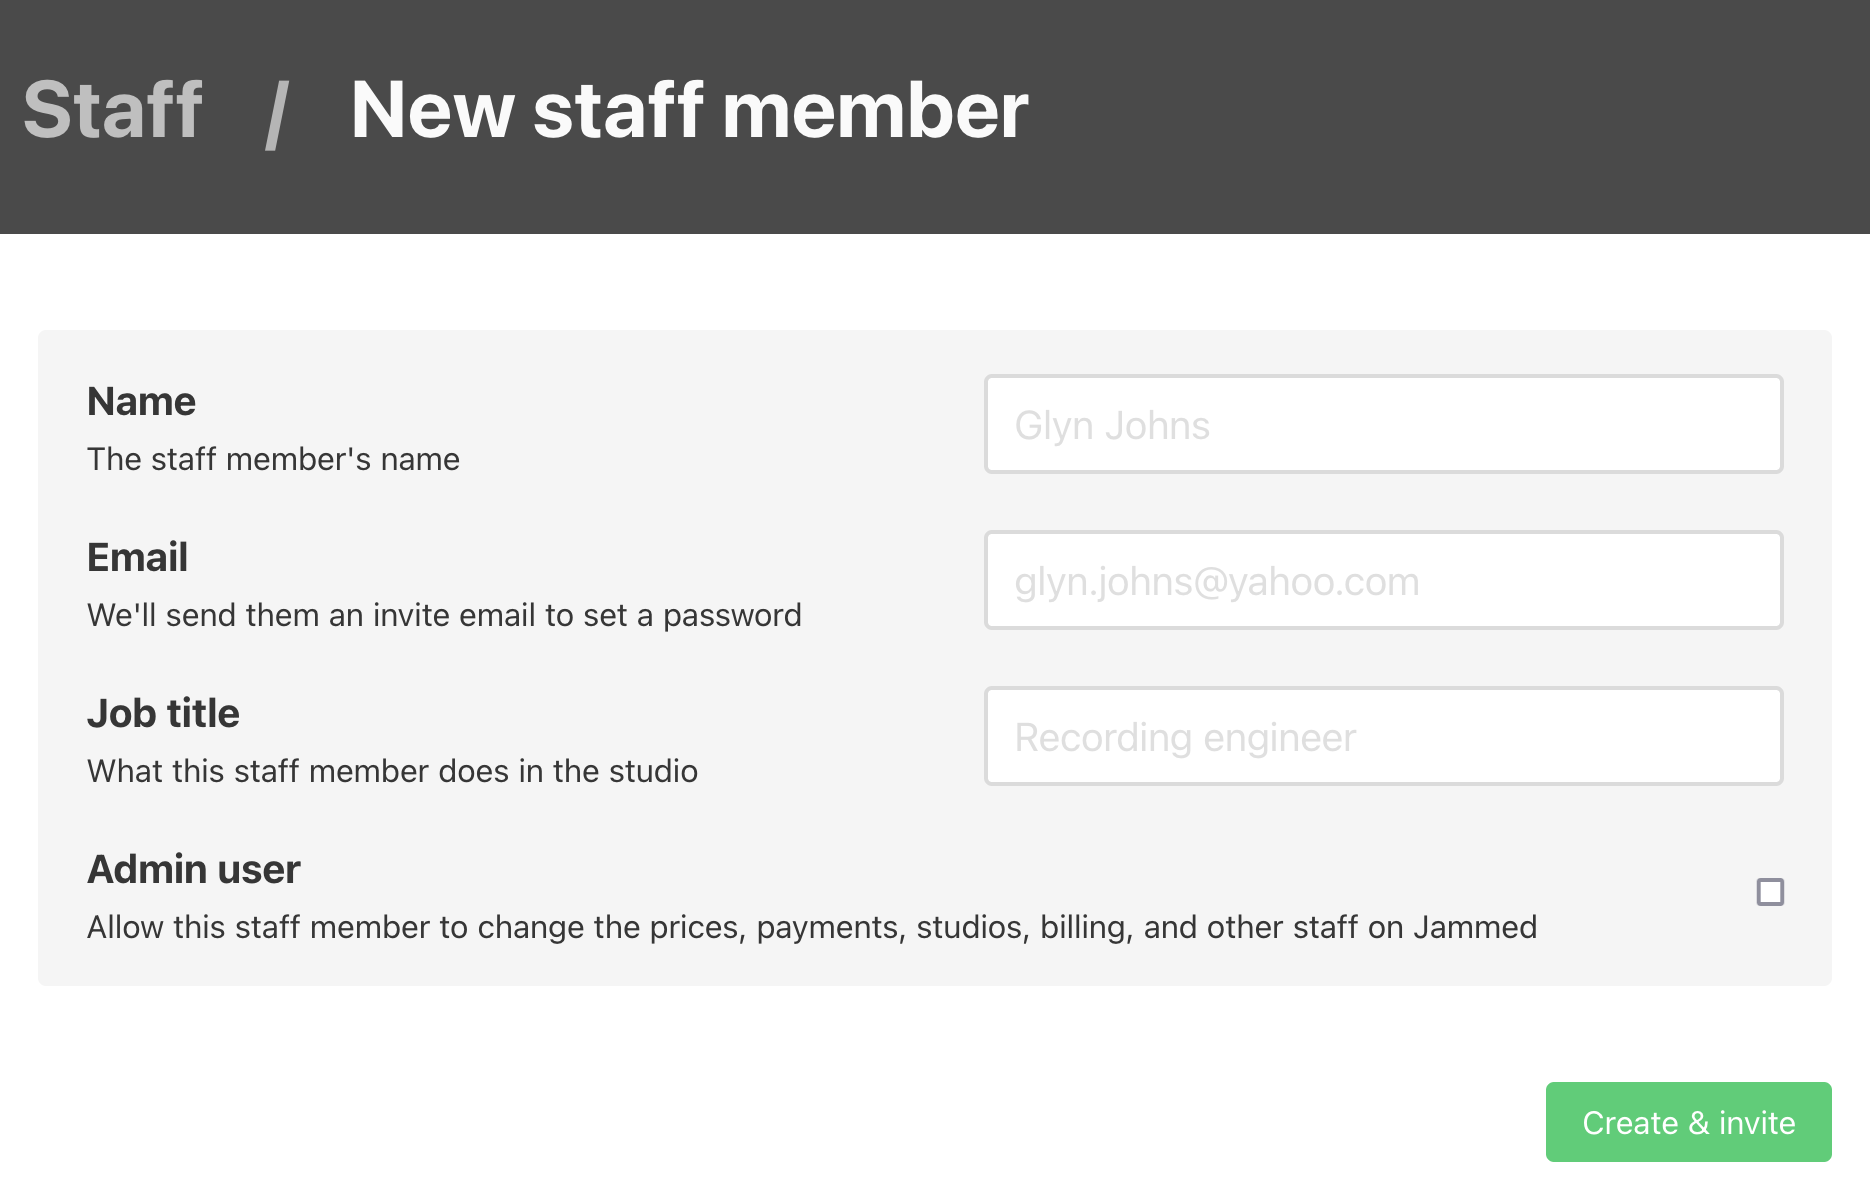 Invite new staff member to Jammed